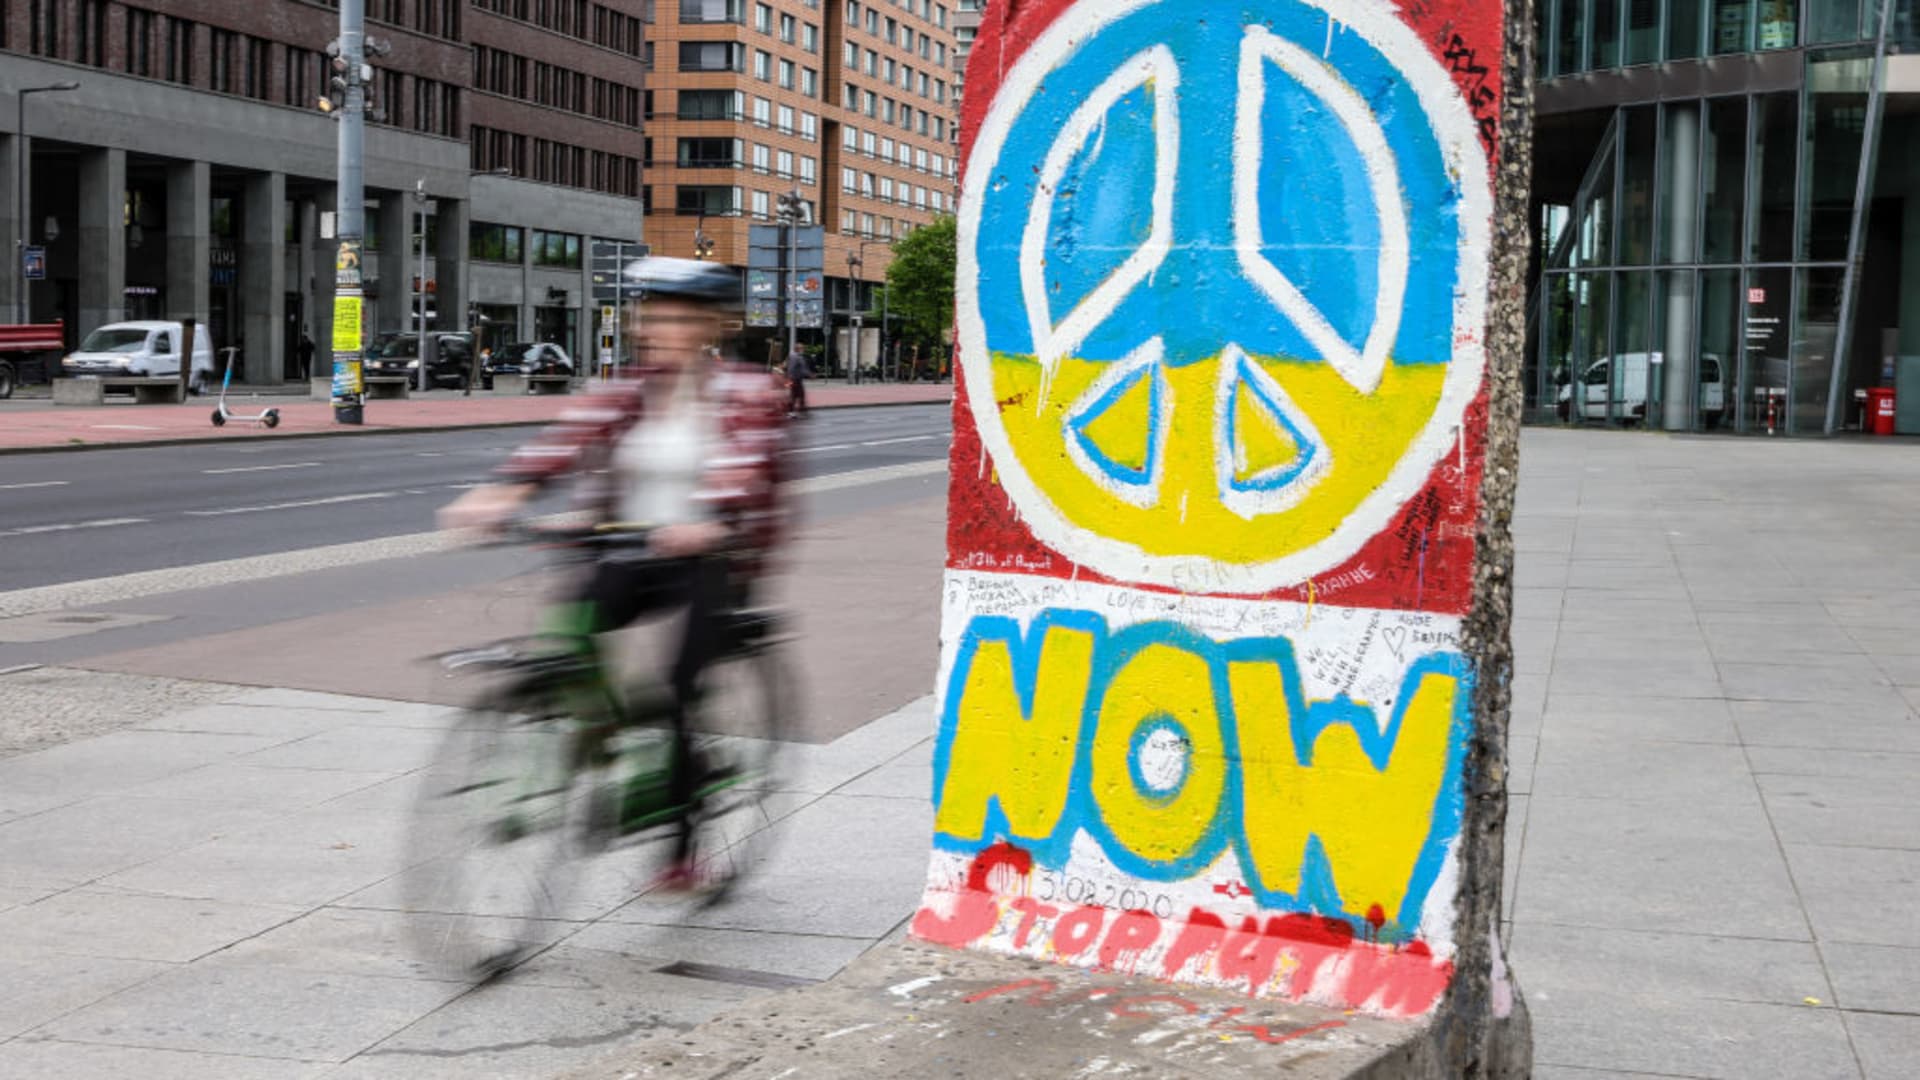 A cyclist passes by a part of the Berlin Wall decorated with a graffiti of a Ukrainian flag colored Peace symbol, expressing solidarity with Ukraine at Potsdamer Platz on May 4, 2022 in Berlin, Germany.